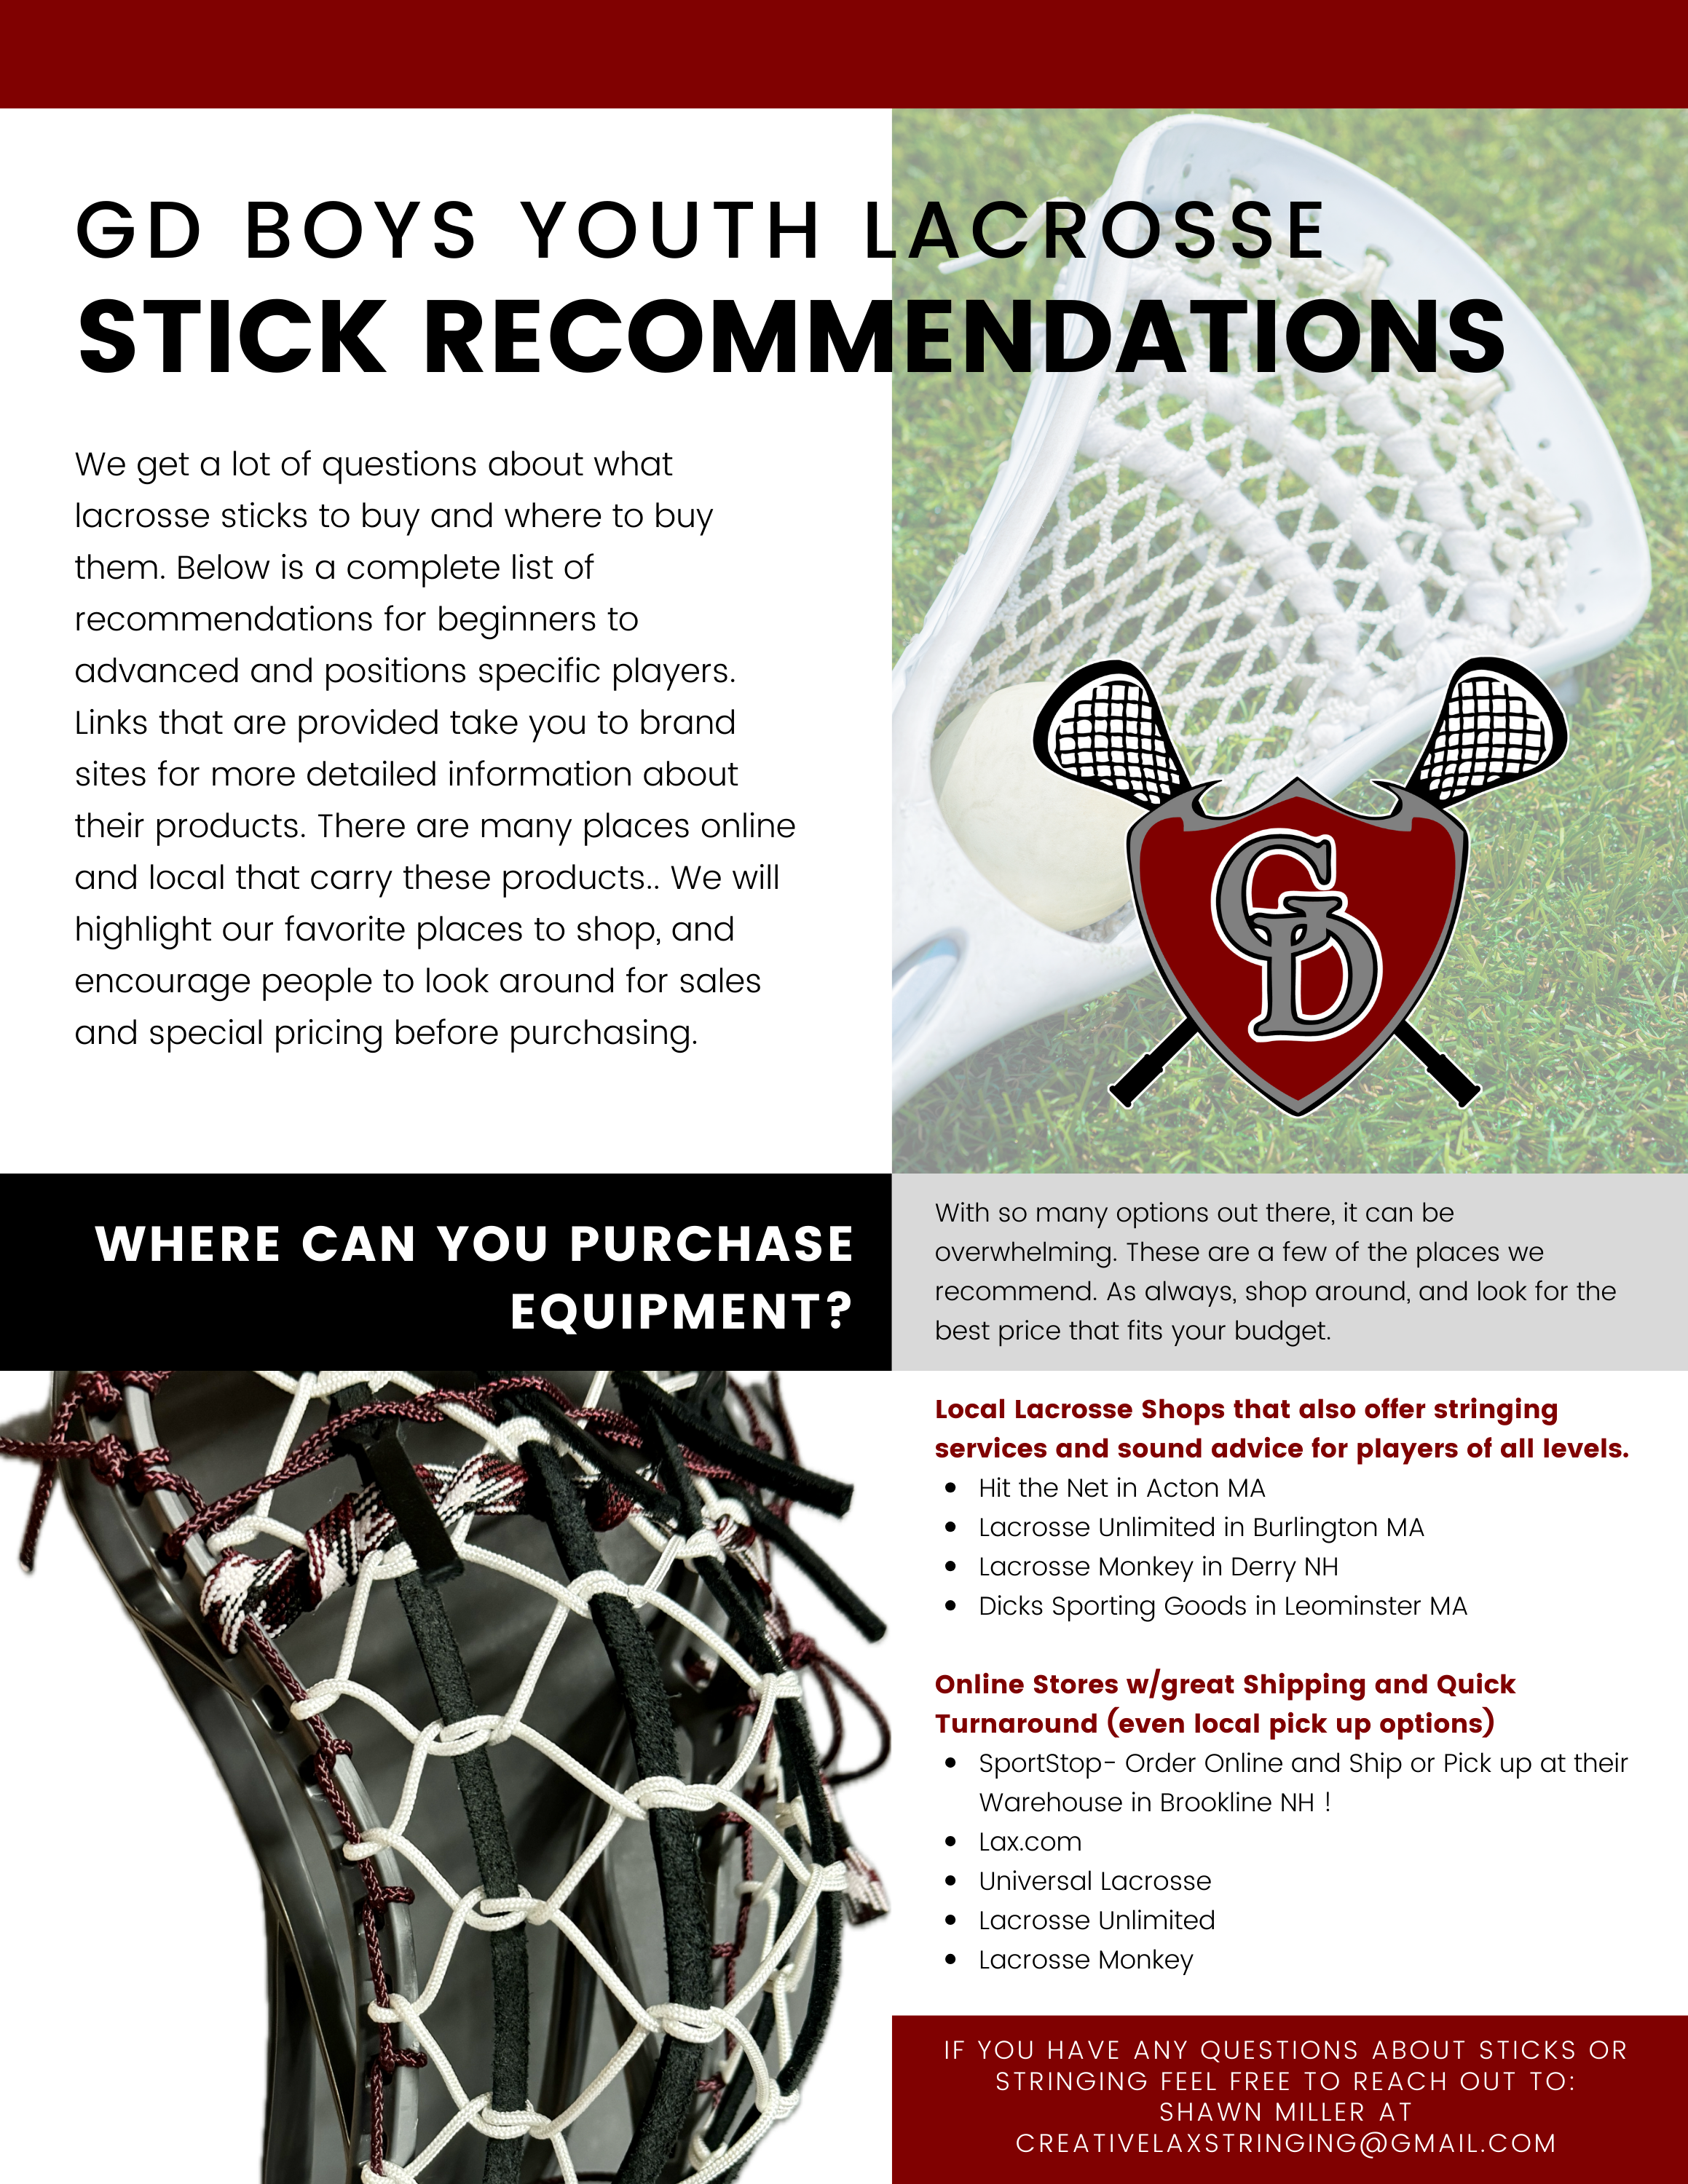 GD BOYS Youth Lacrosse Stick Recommendations